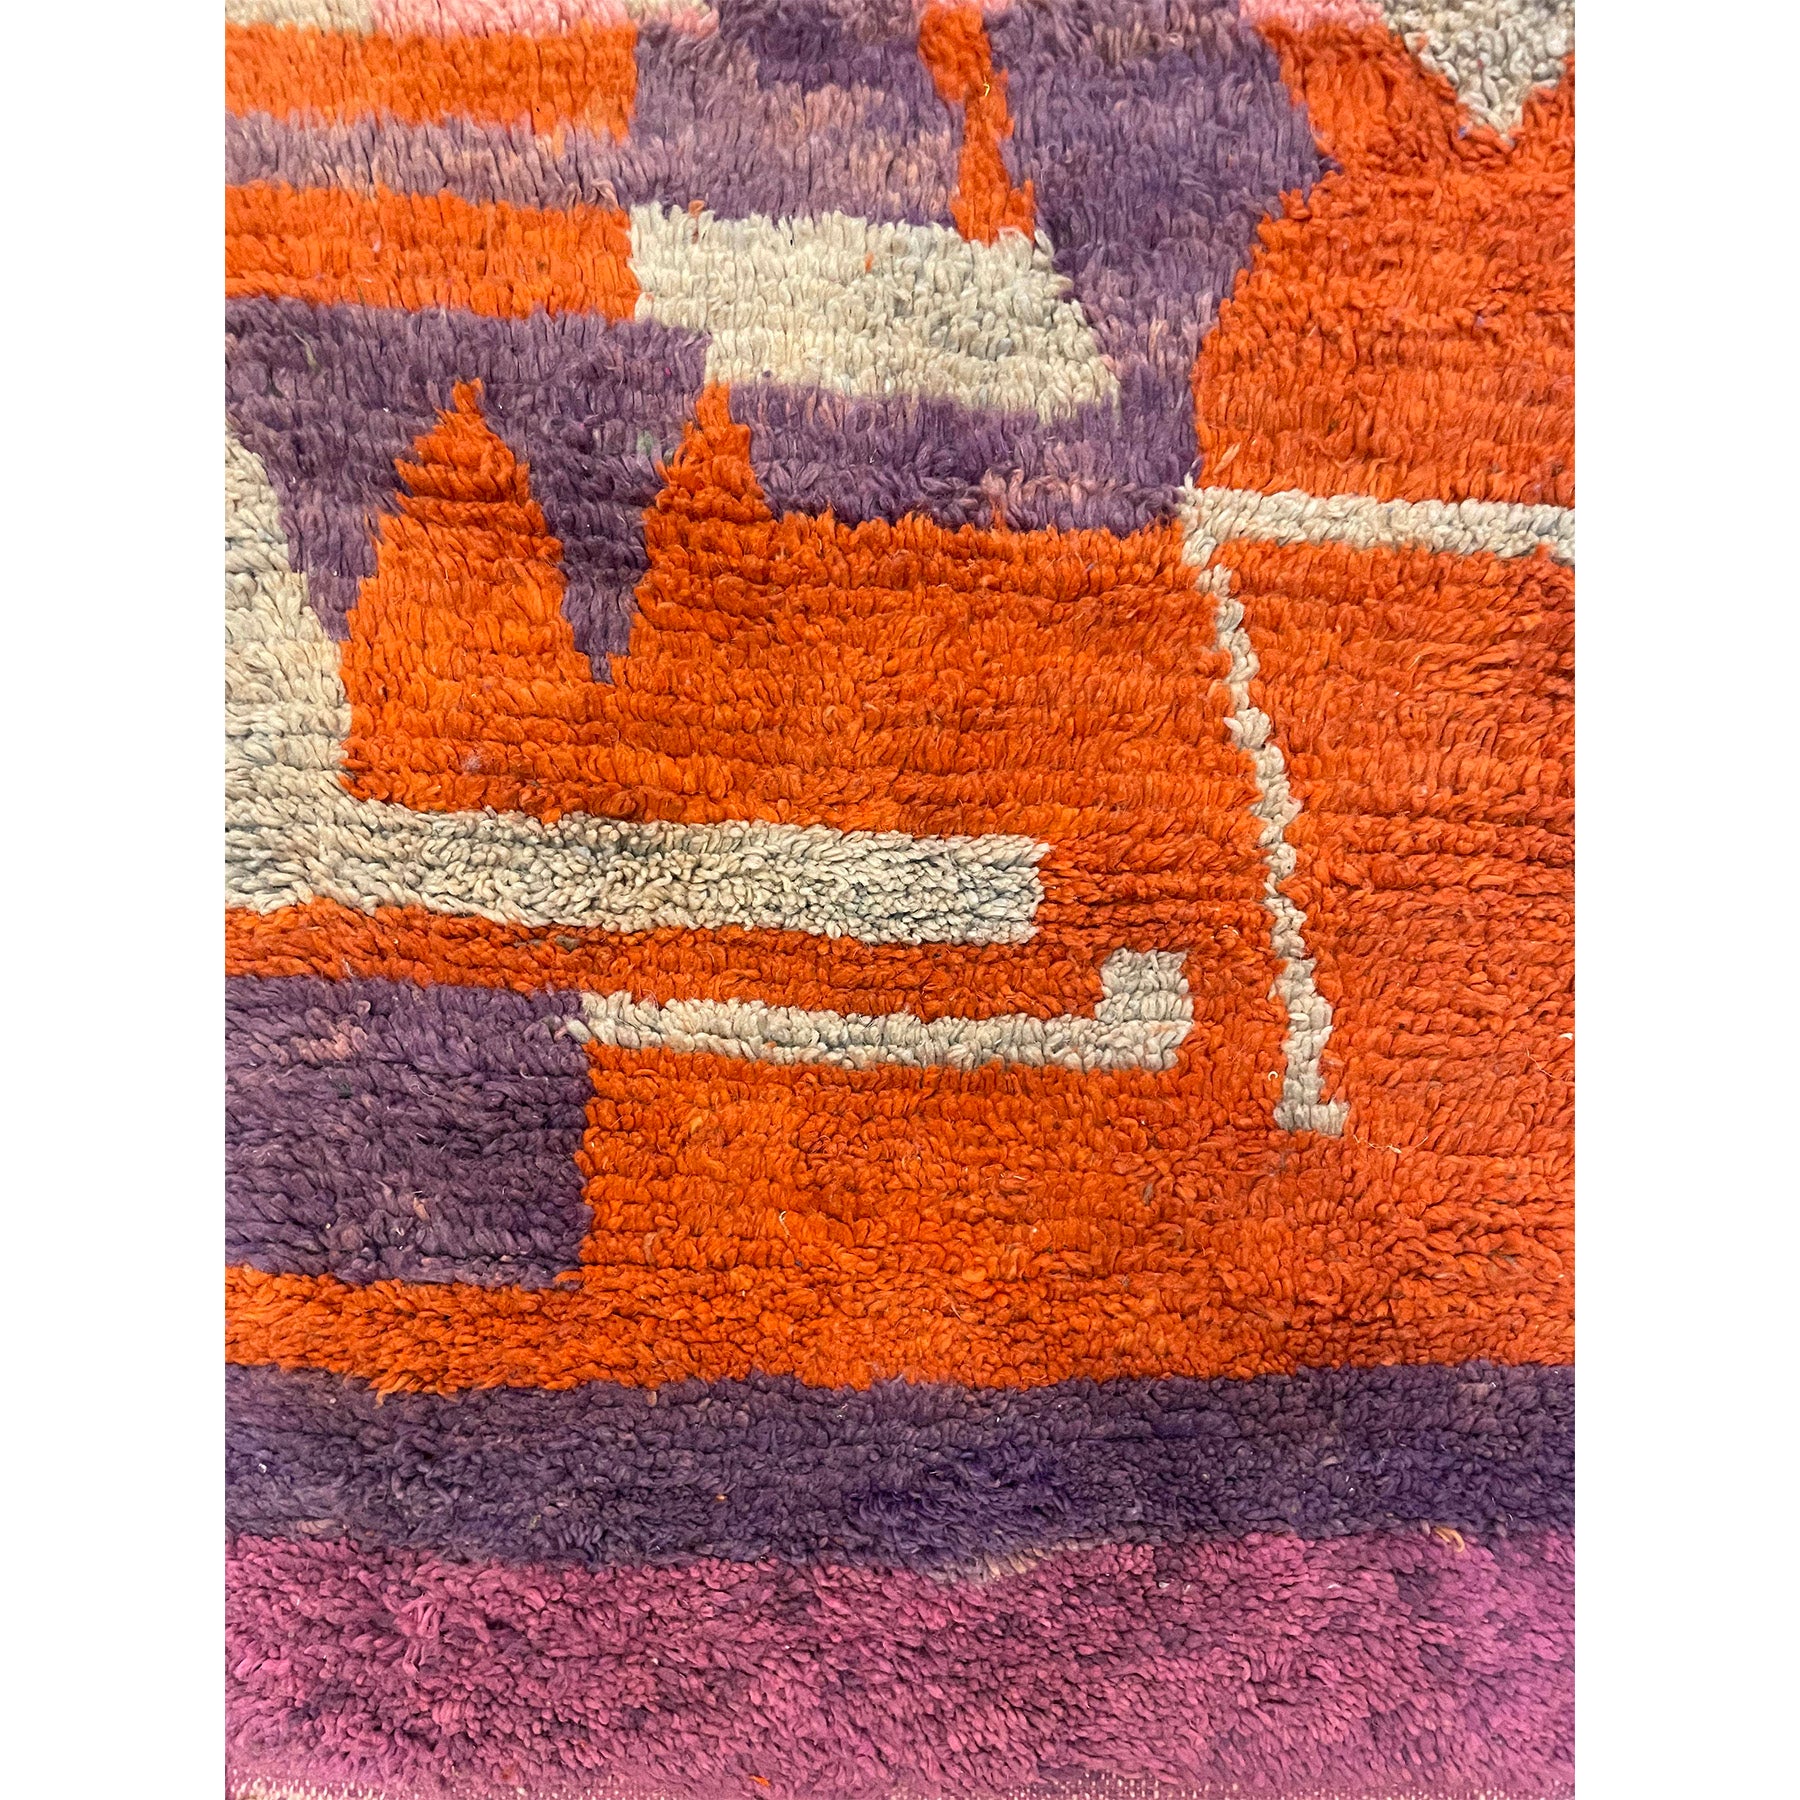 Purple Moroccan runner rug with details in orange and cream - Kantara | Moroccan Rugs